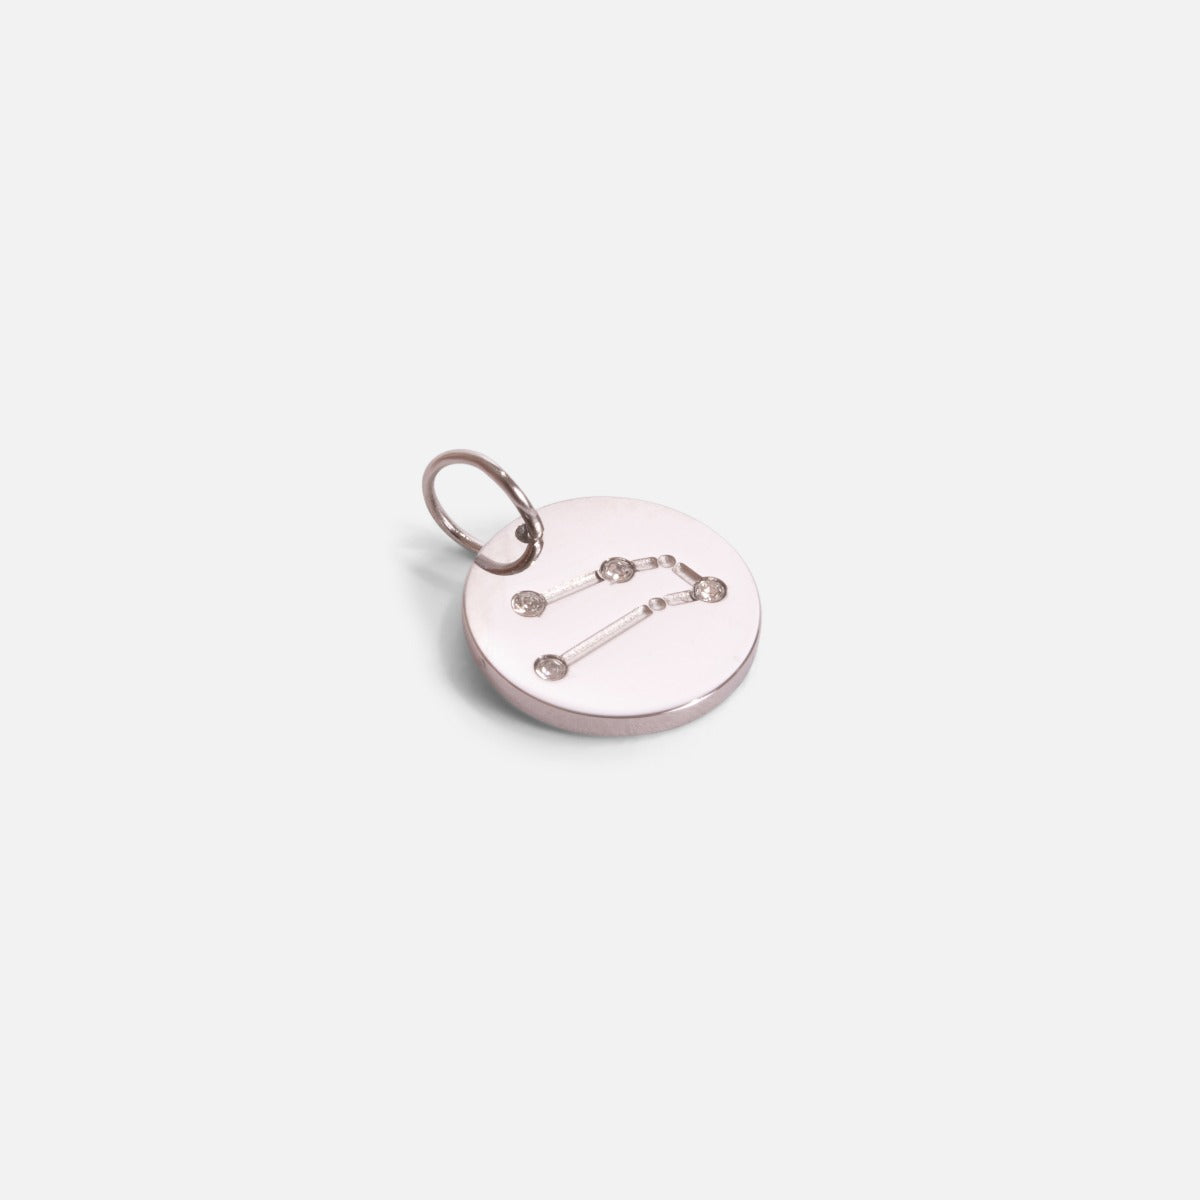 Small silvered charm engraved with the zodiac constellation "gemini"